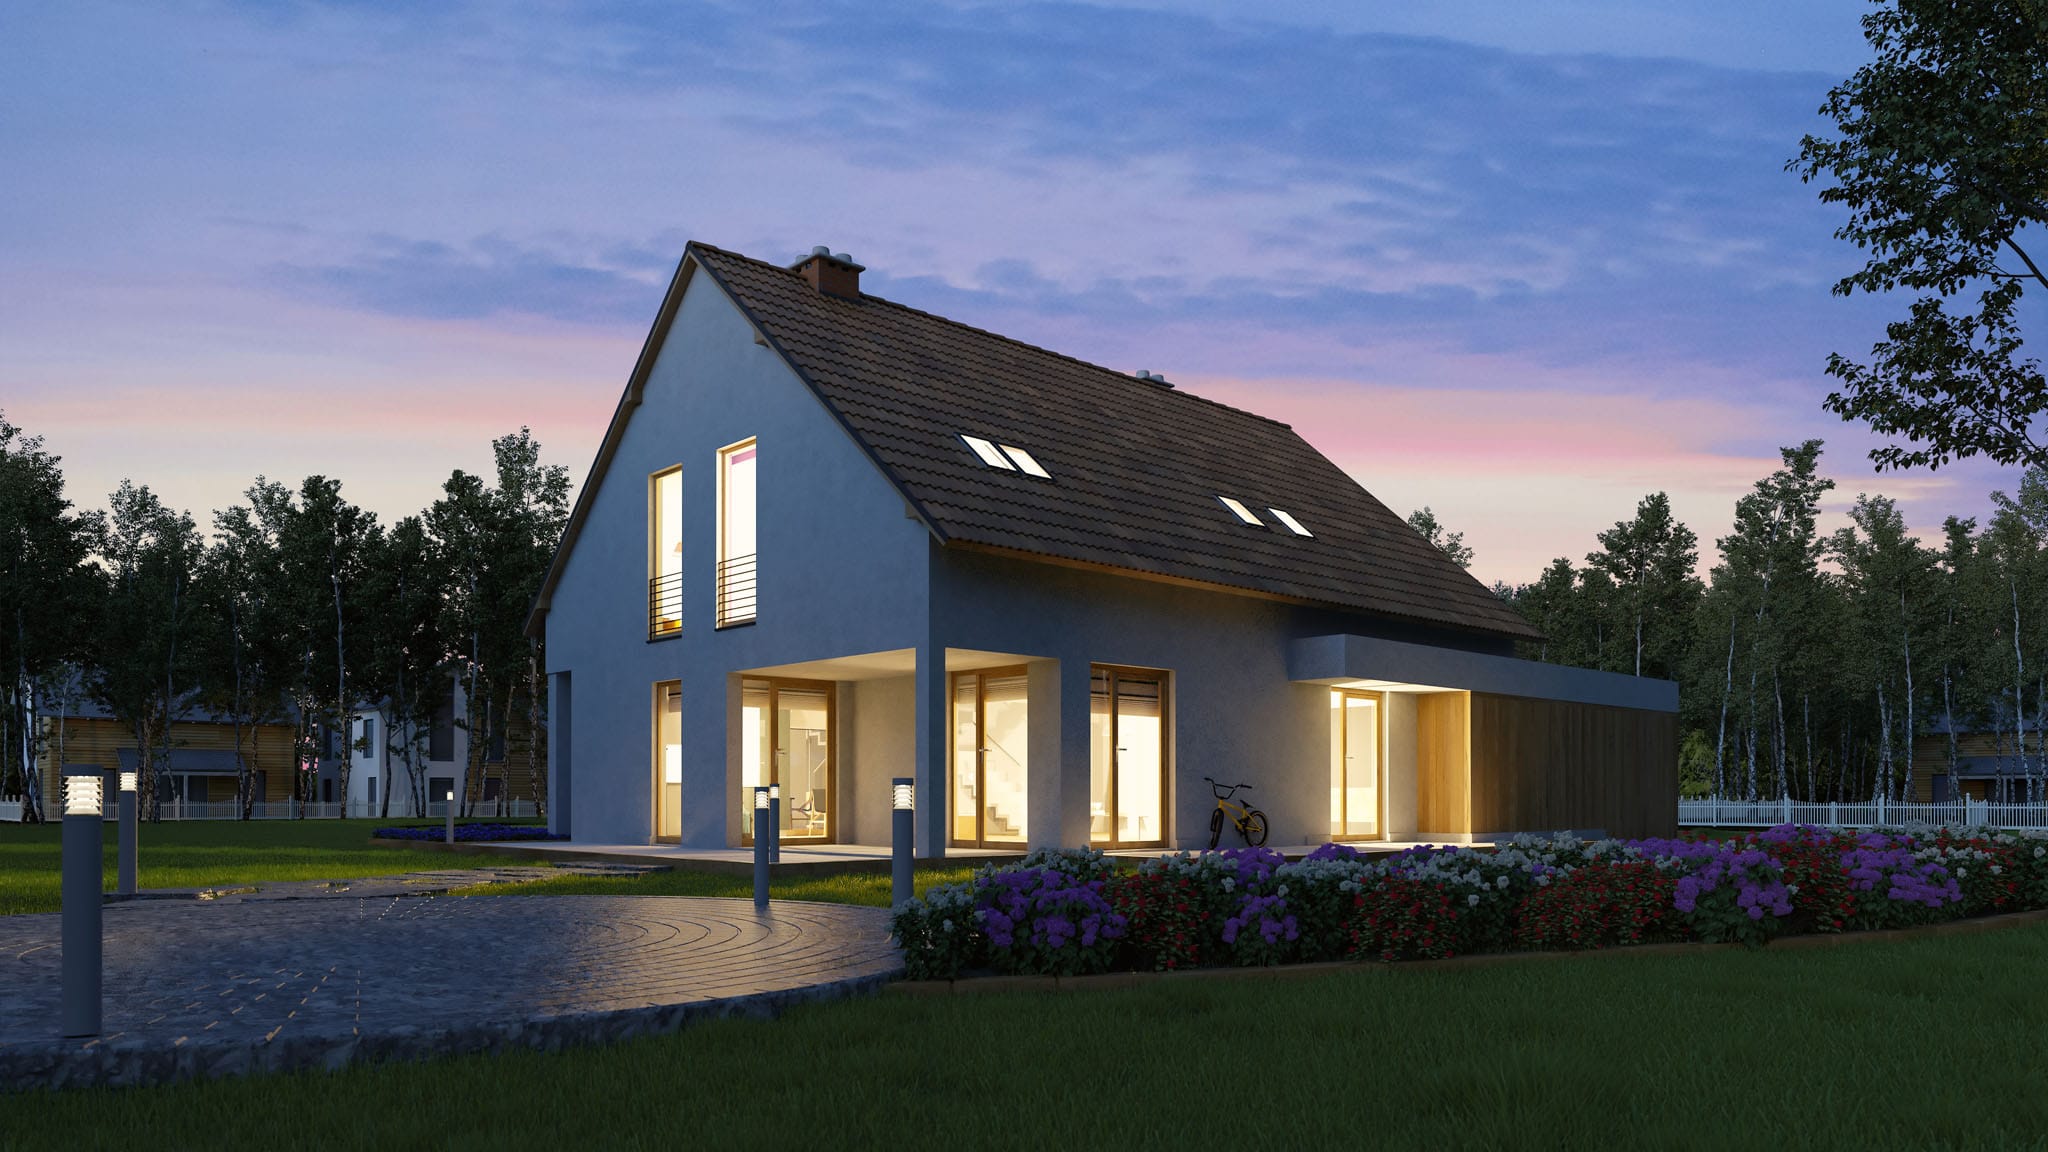 Illuminated family home with garden in the evening in the dark (3D Rendering)